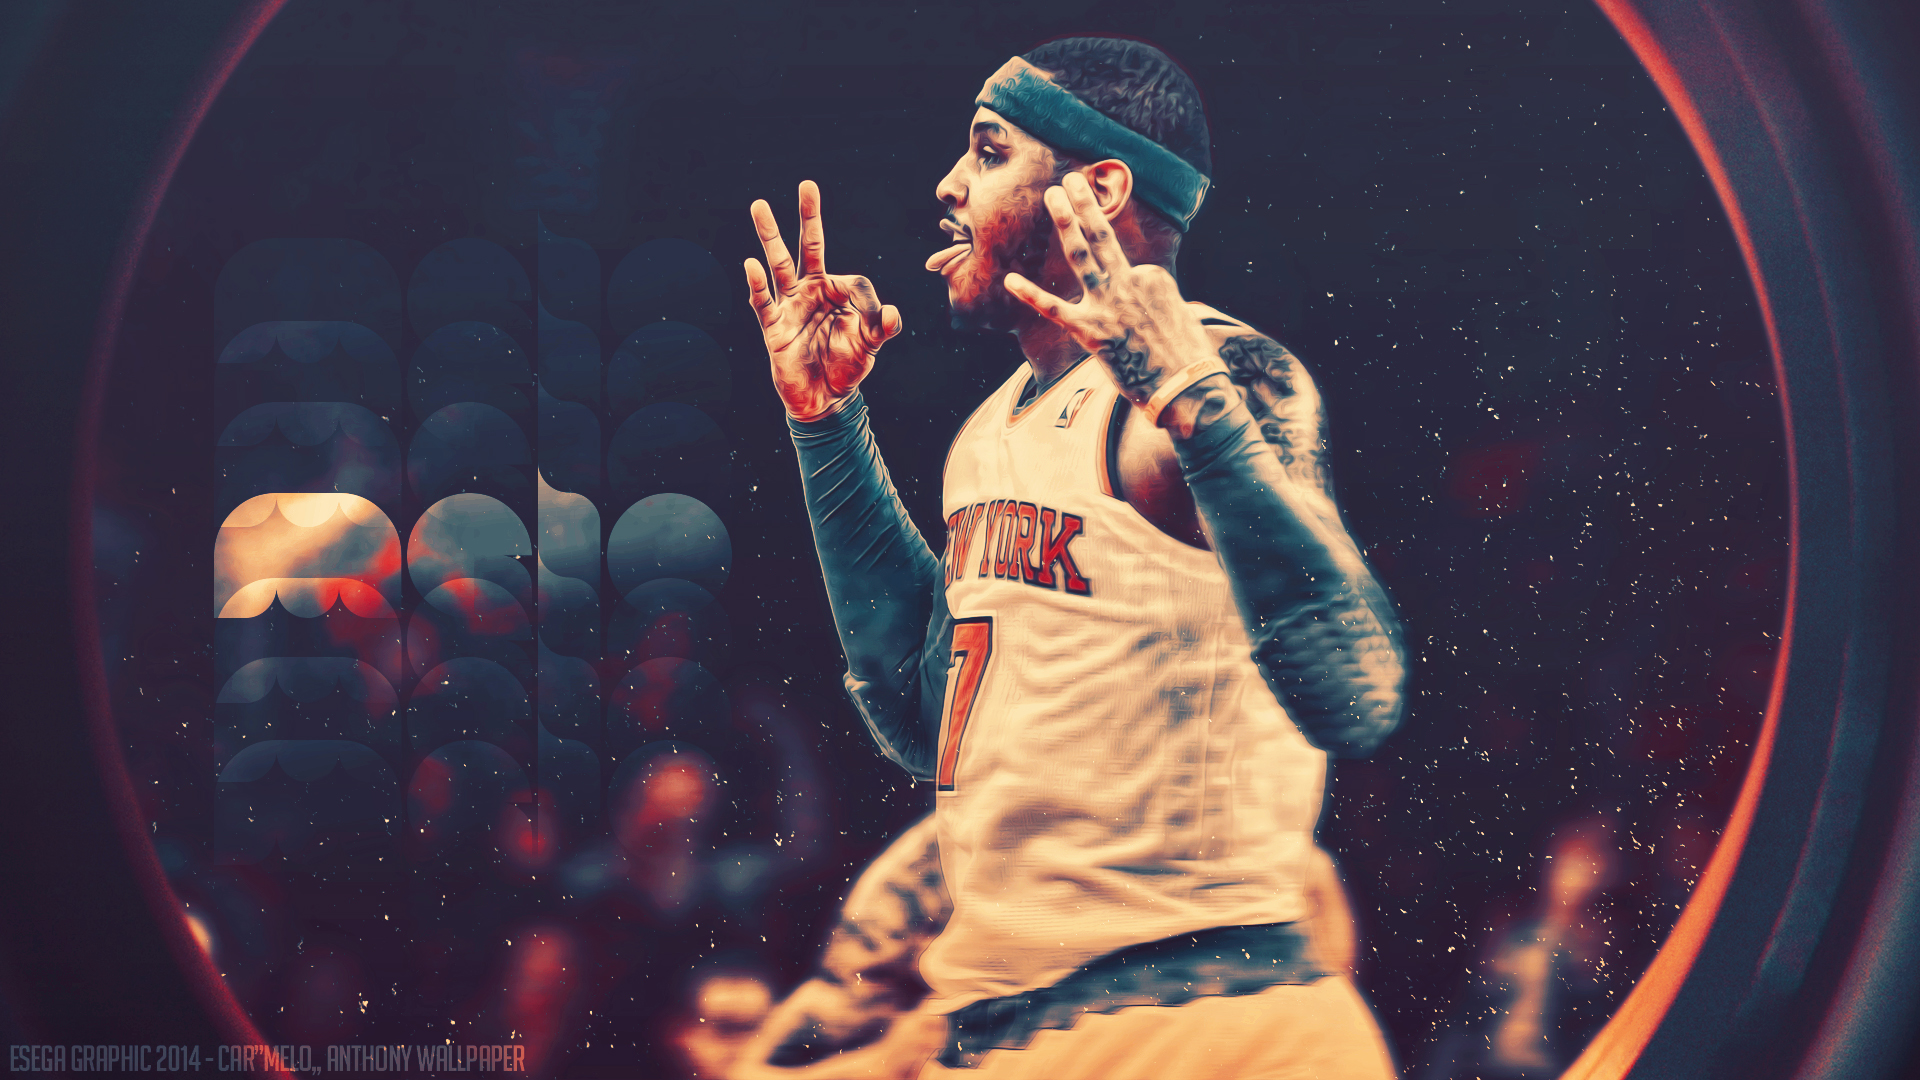 Wallpaper Other Esegagraphic Carmelo Anthony Nyk